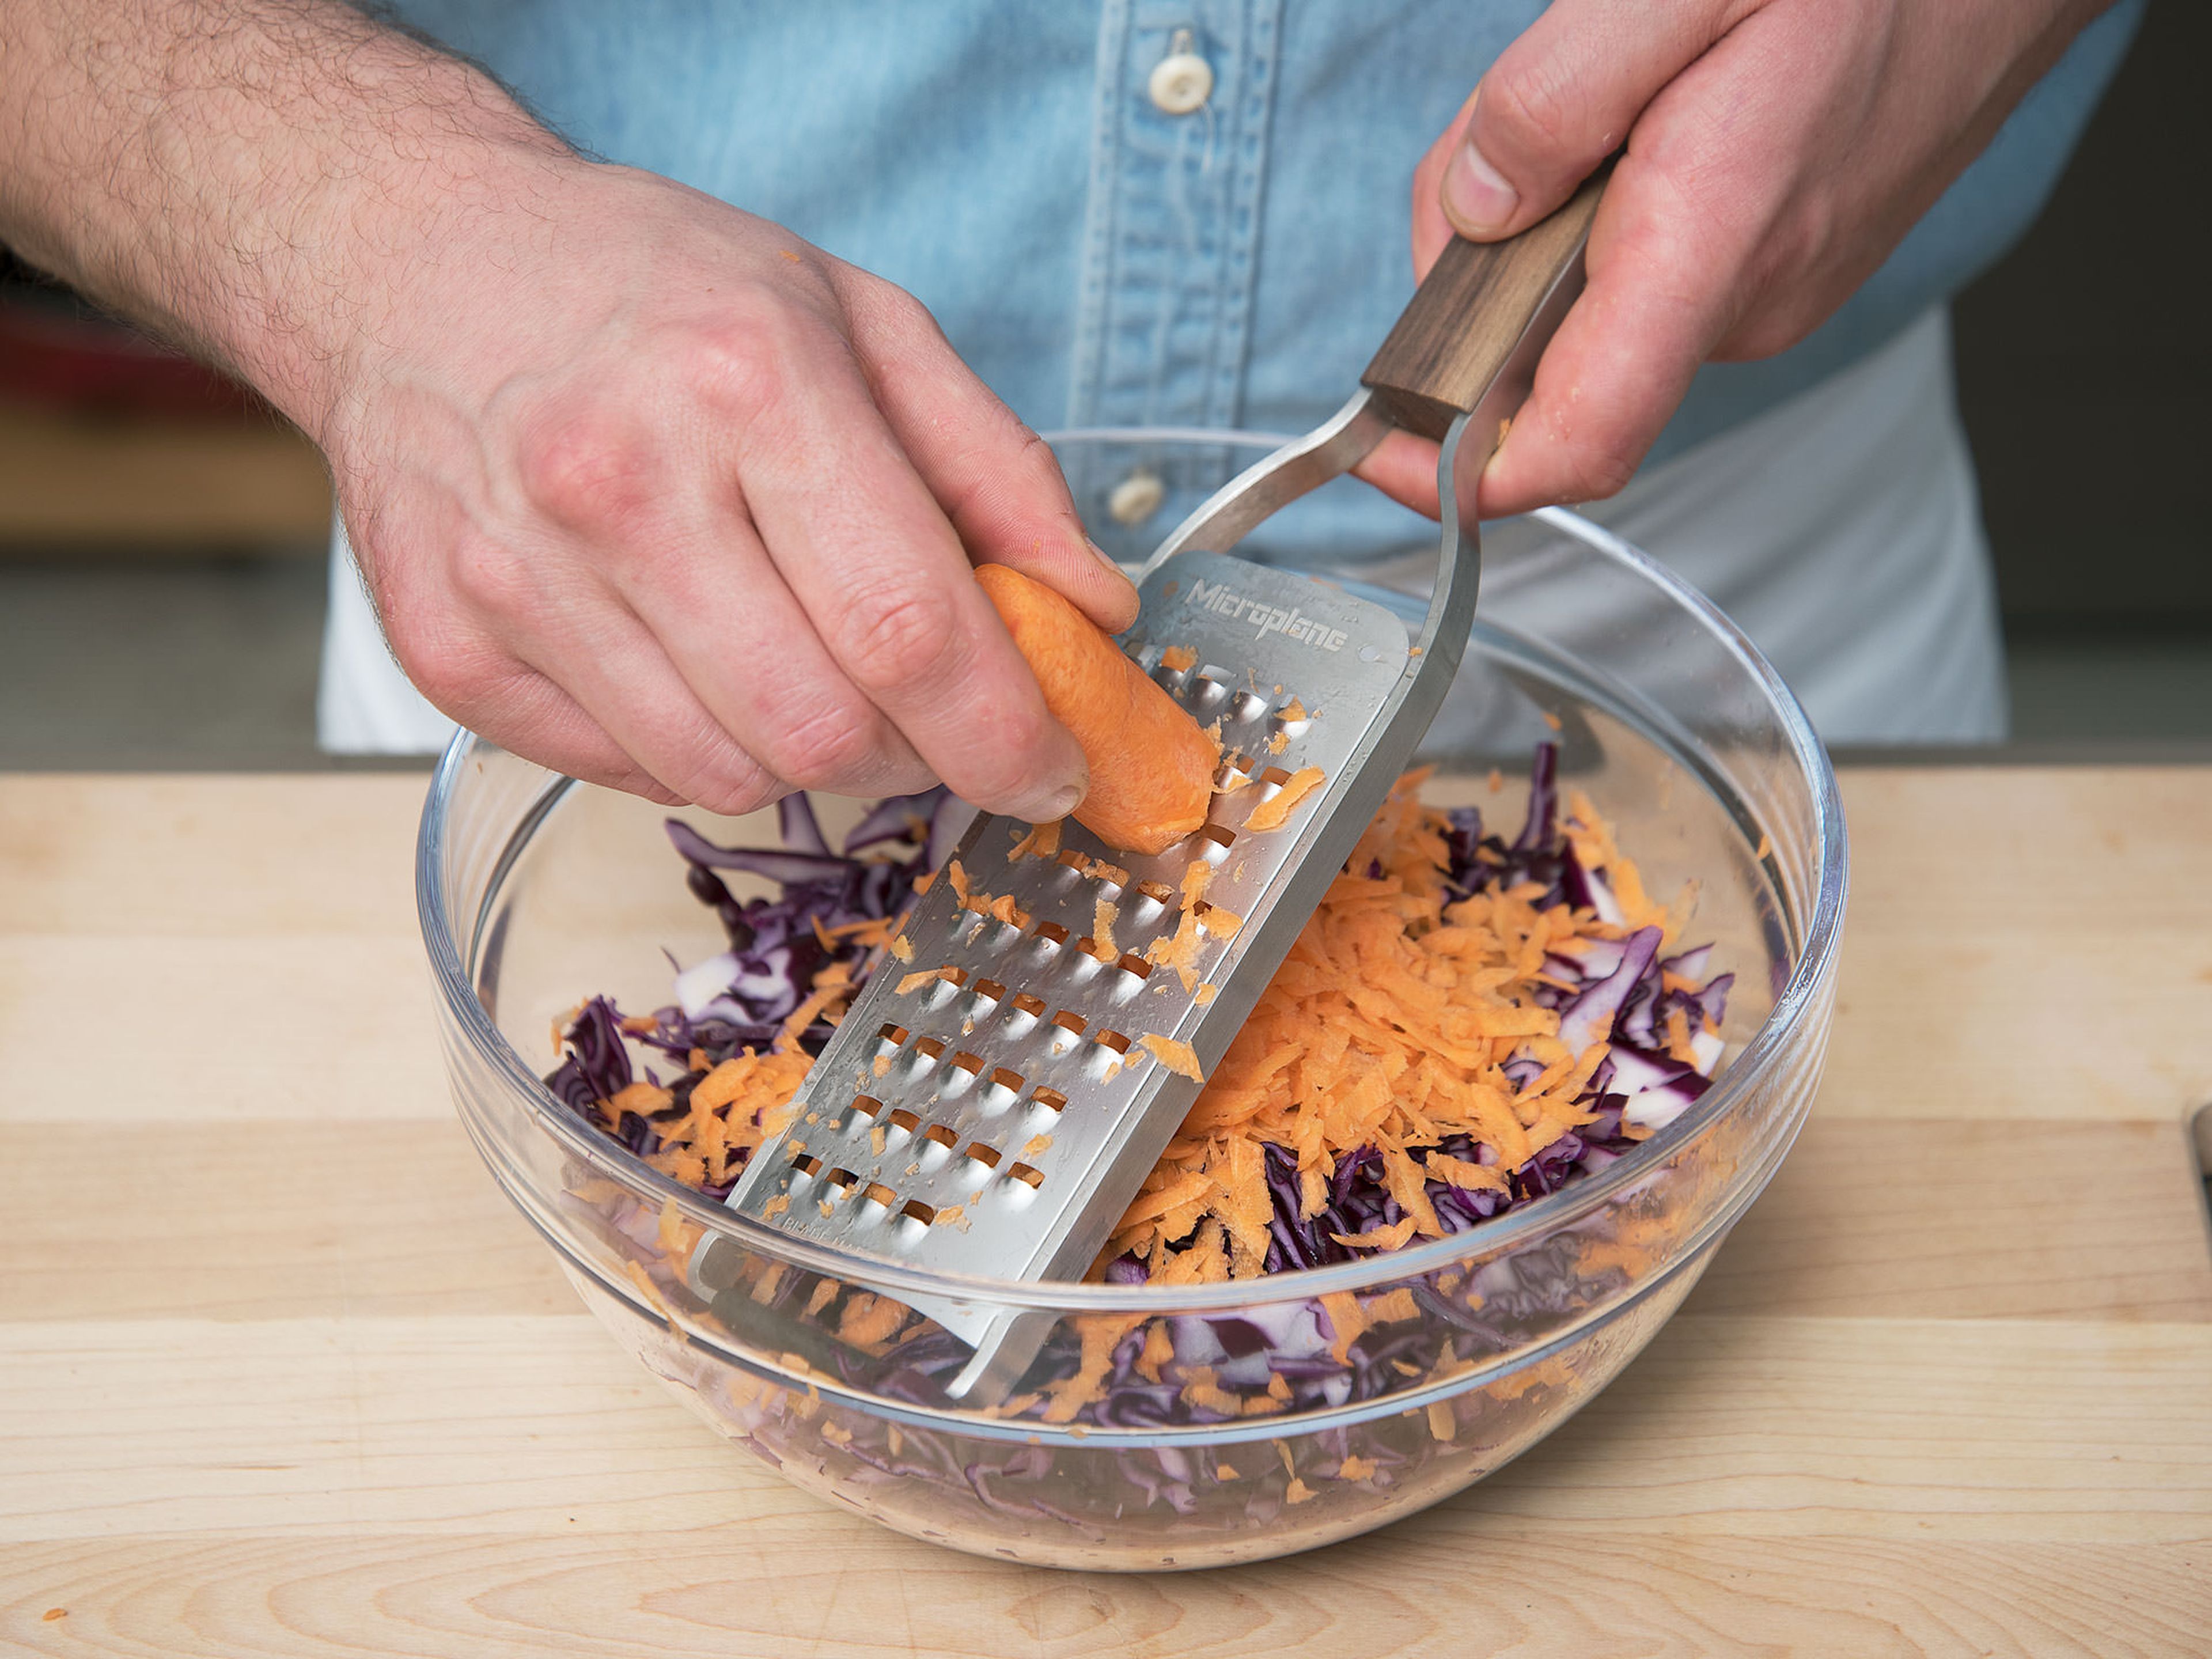 Remove stem and outer leaves from the red cabbage. Roughly cut and grate it into a large bowl. Wash and grate carrots, then add them to the red cabbage.